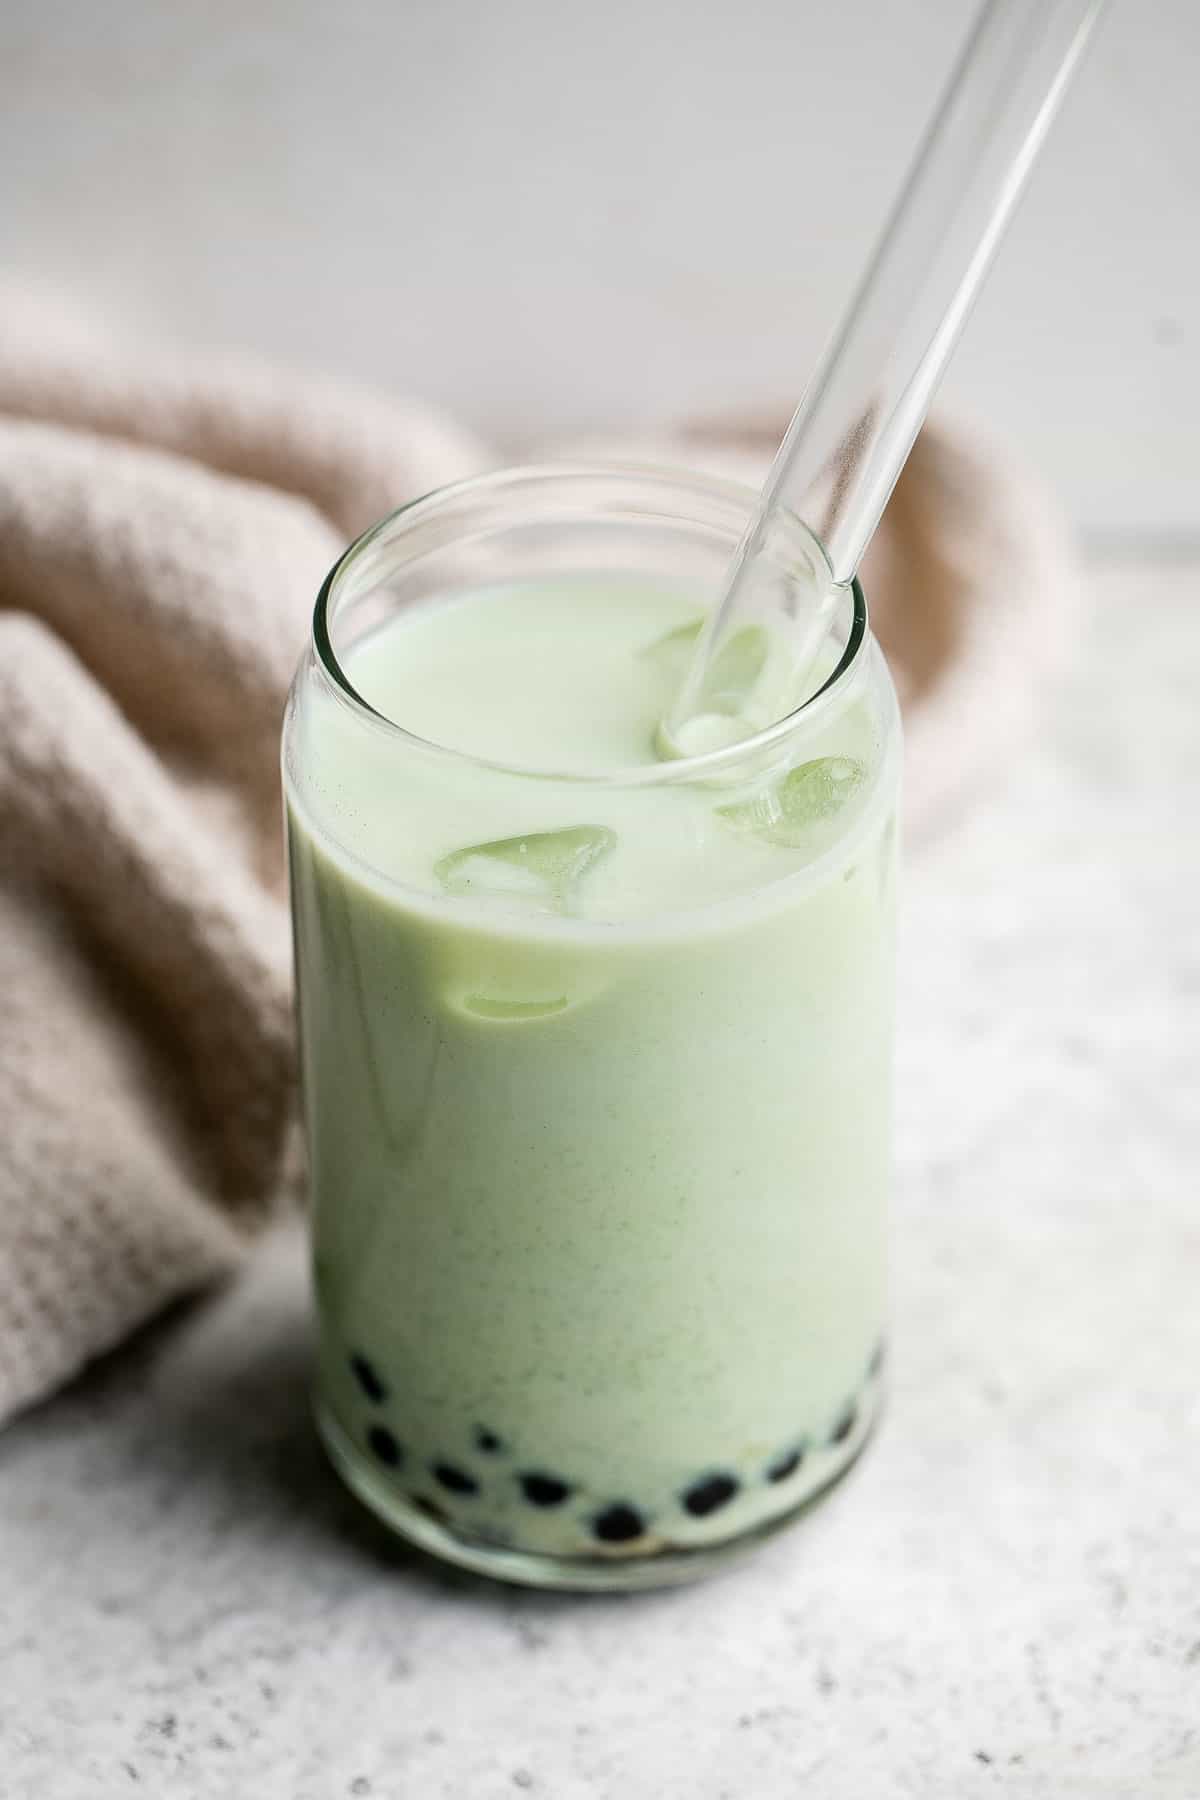 Iced Matcha Milk Tea with boba tapioca pearls is rich, refreshing, and delicious. Made with 3 ingredients, matcha bubble tea is easy to make at home. | aheadofthyme.com